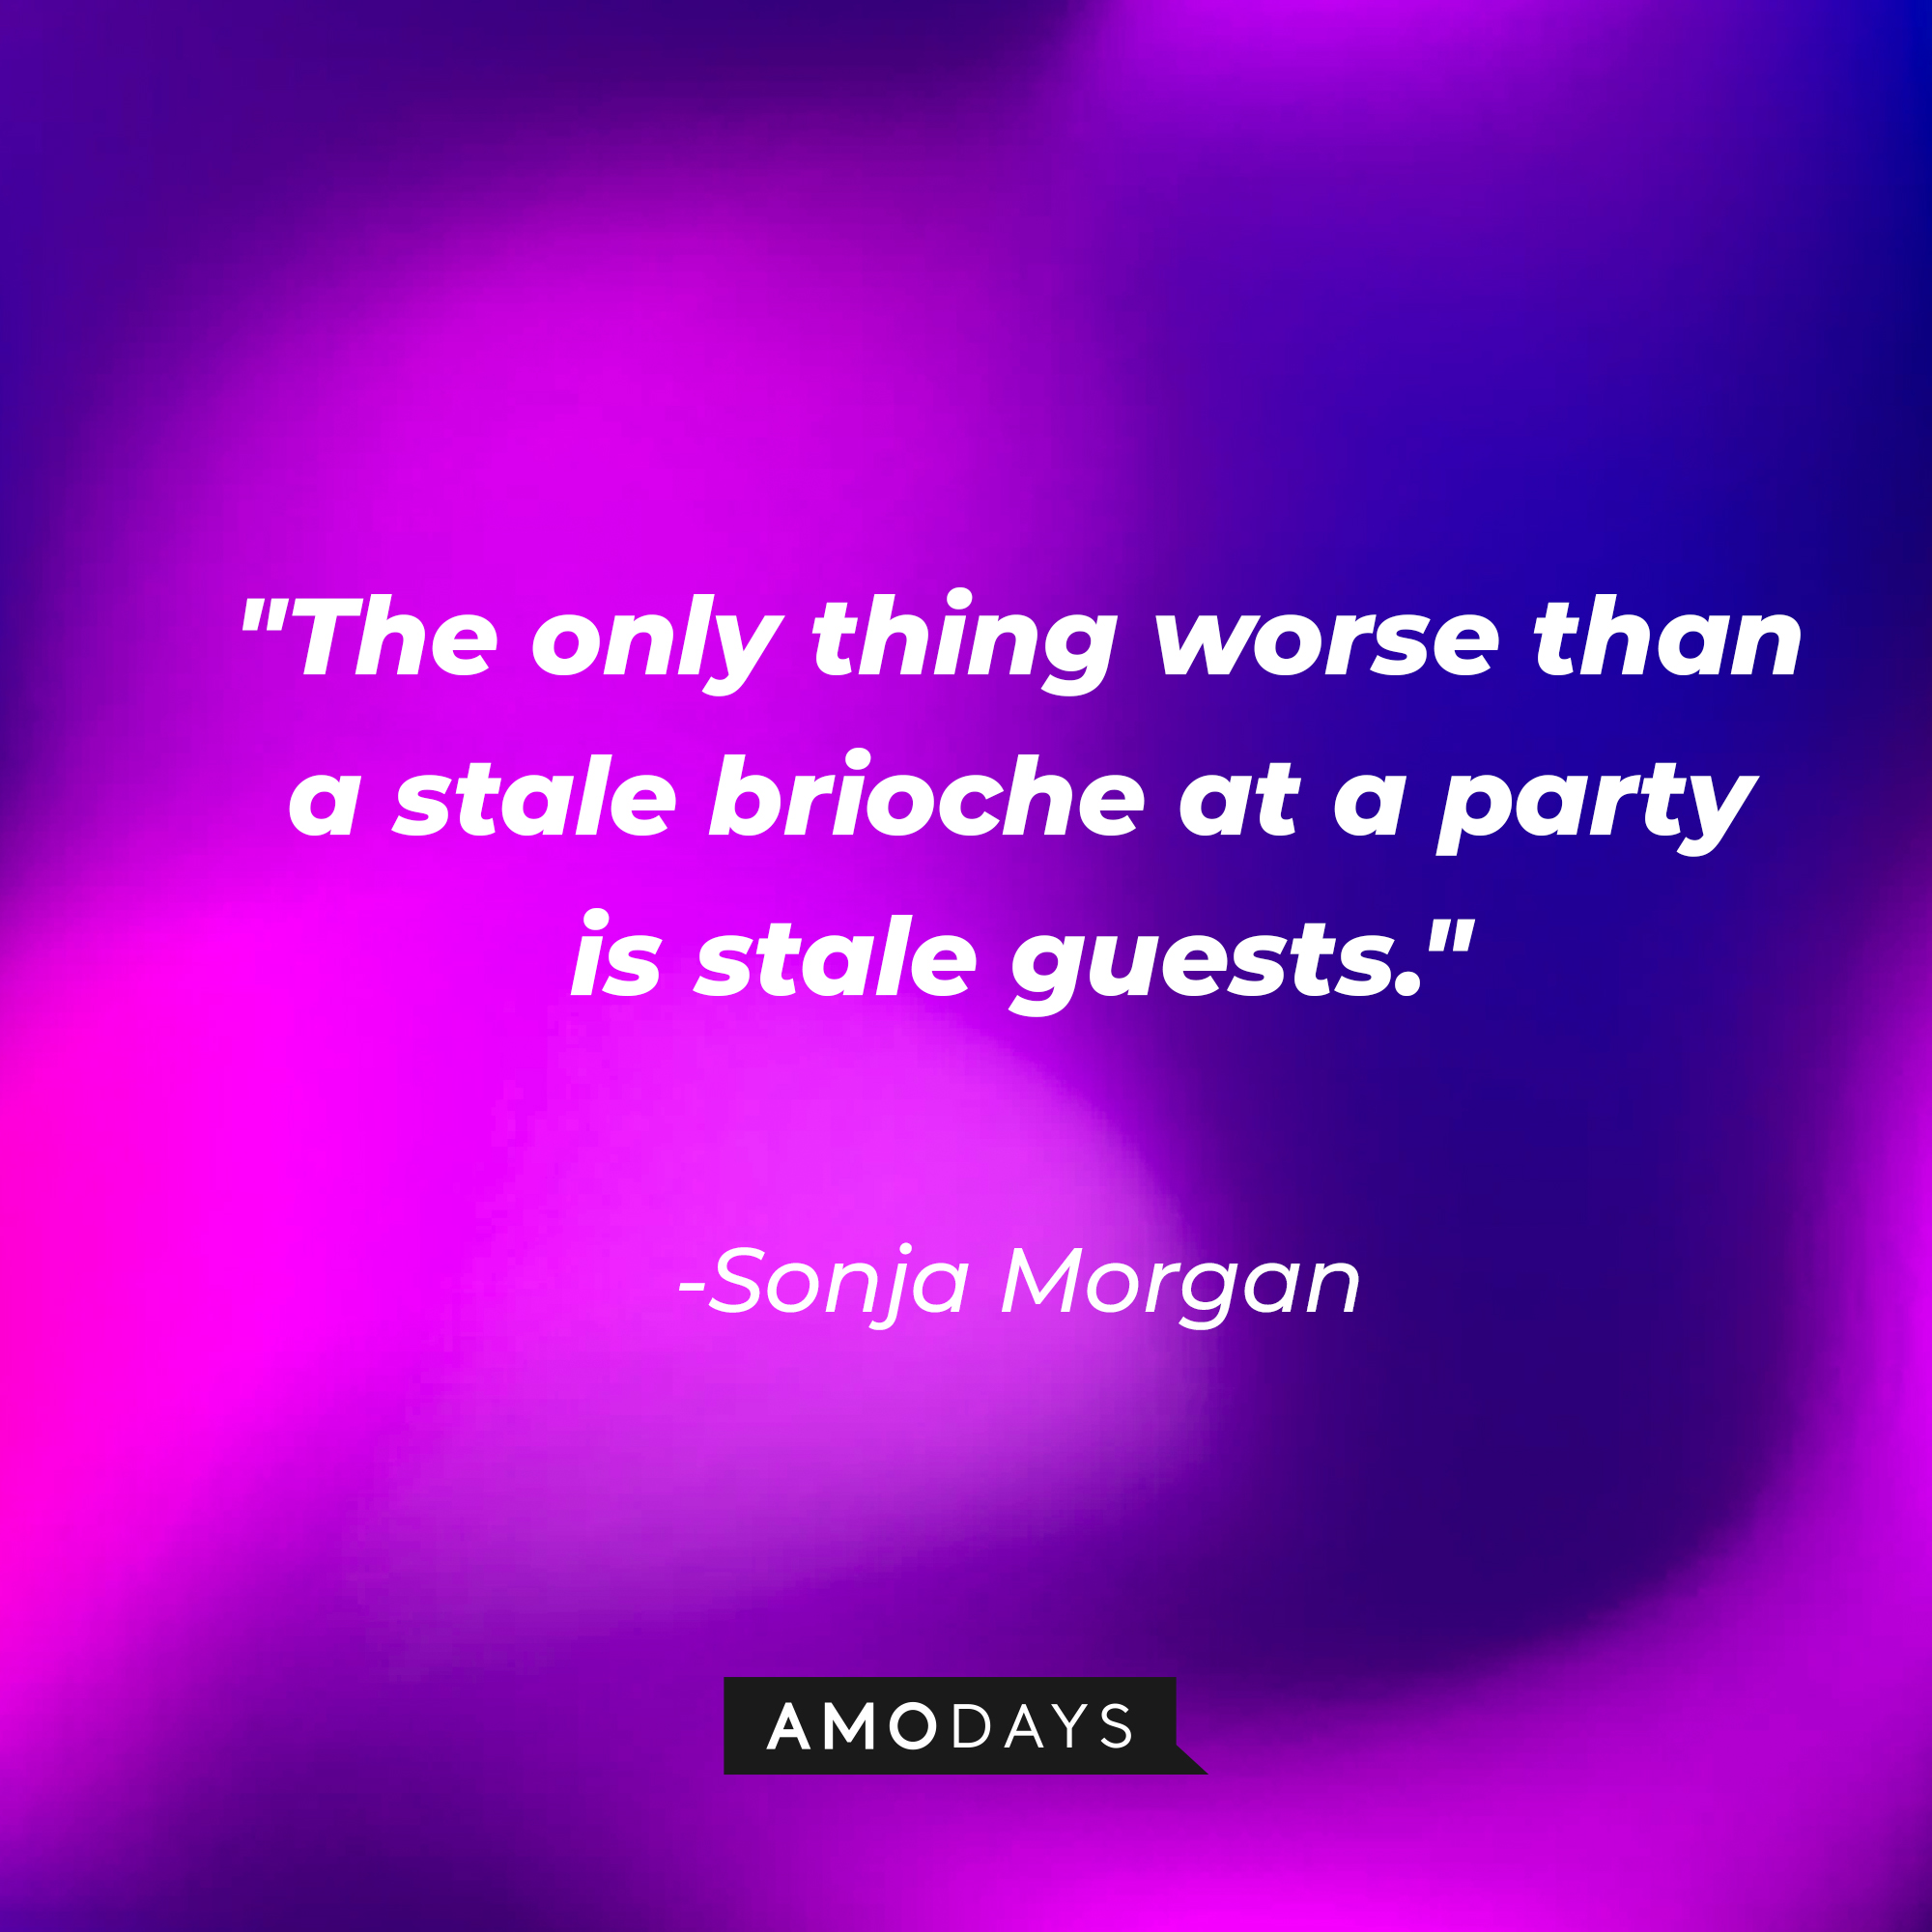 Sonja Morgan's quote: "The only thing worse than a stale brioche at a party is stale guests." Sonja Morgan's quote: "I don't stir the pot. I stir the drink." | Source: Amodays